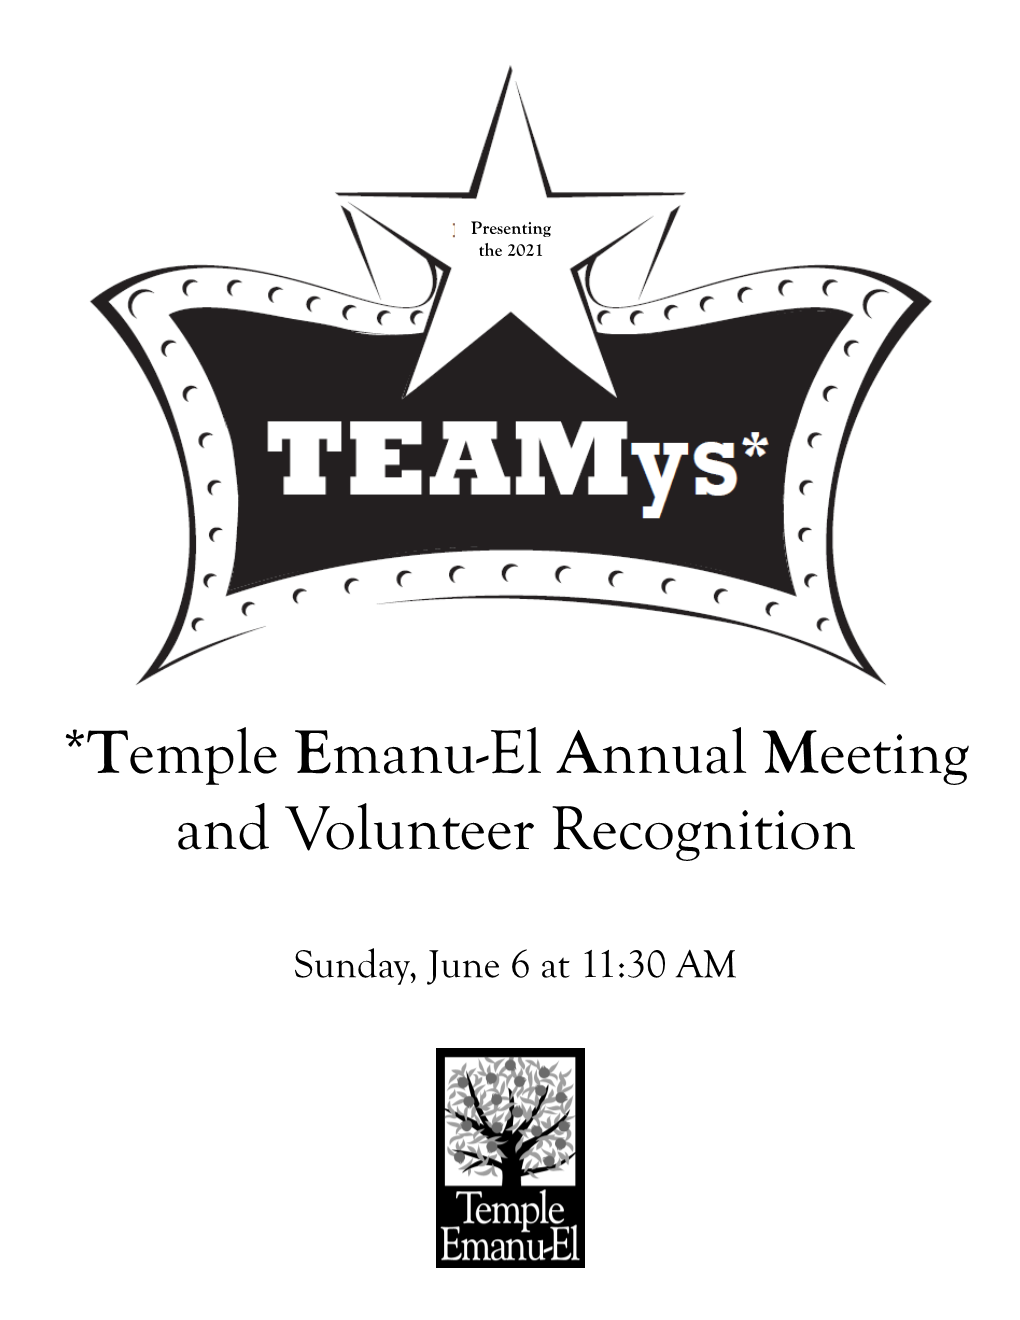 *Temple Emanu-El Annual Meeting and Volunteer Recognition